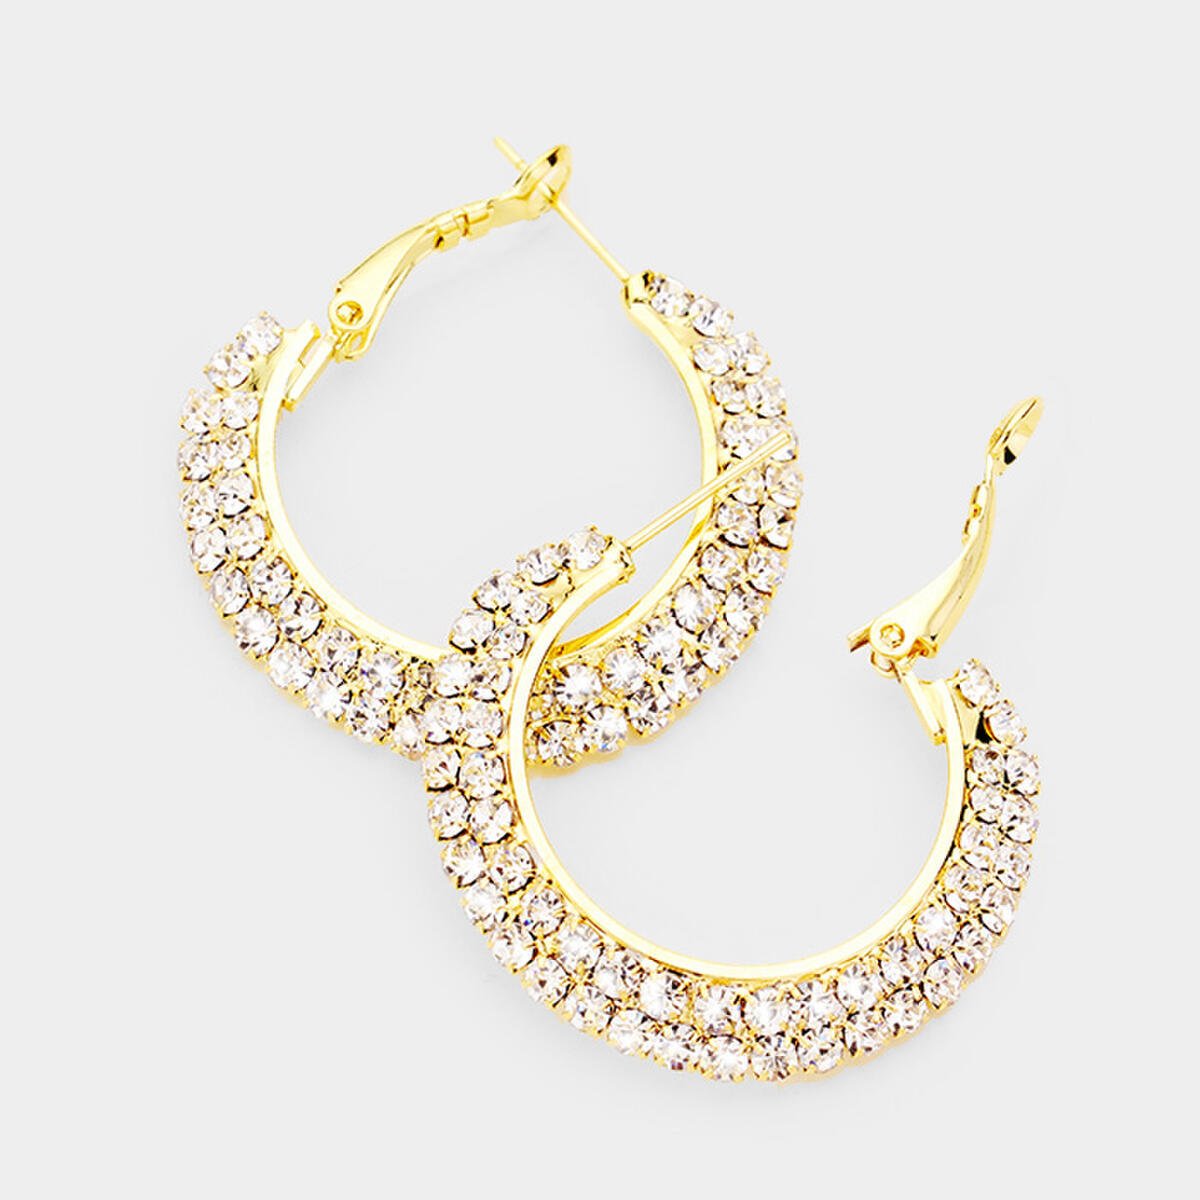 Gold or Silver hoops